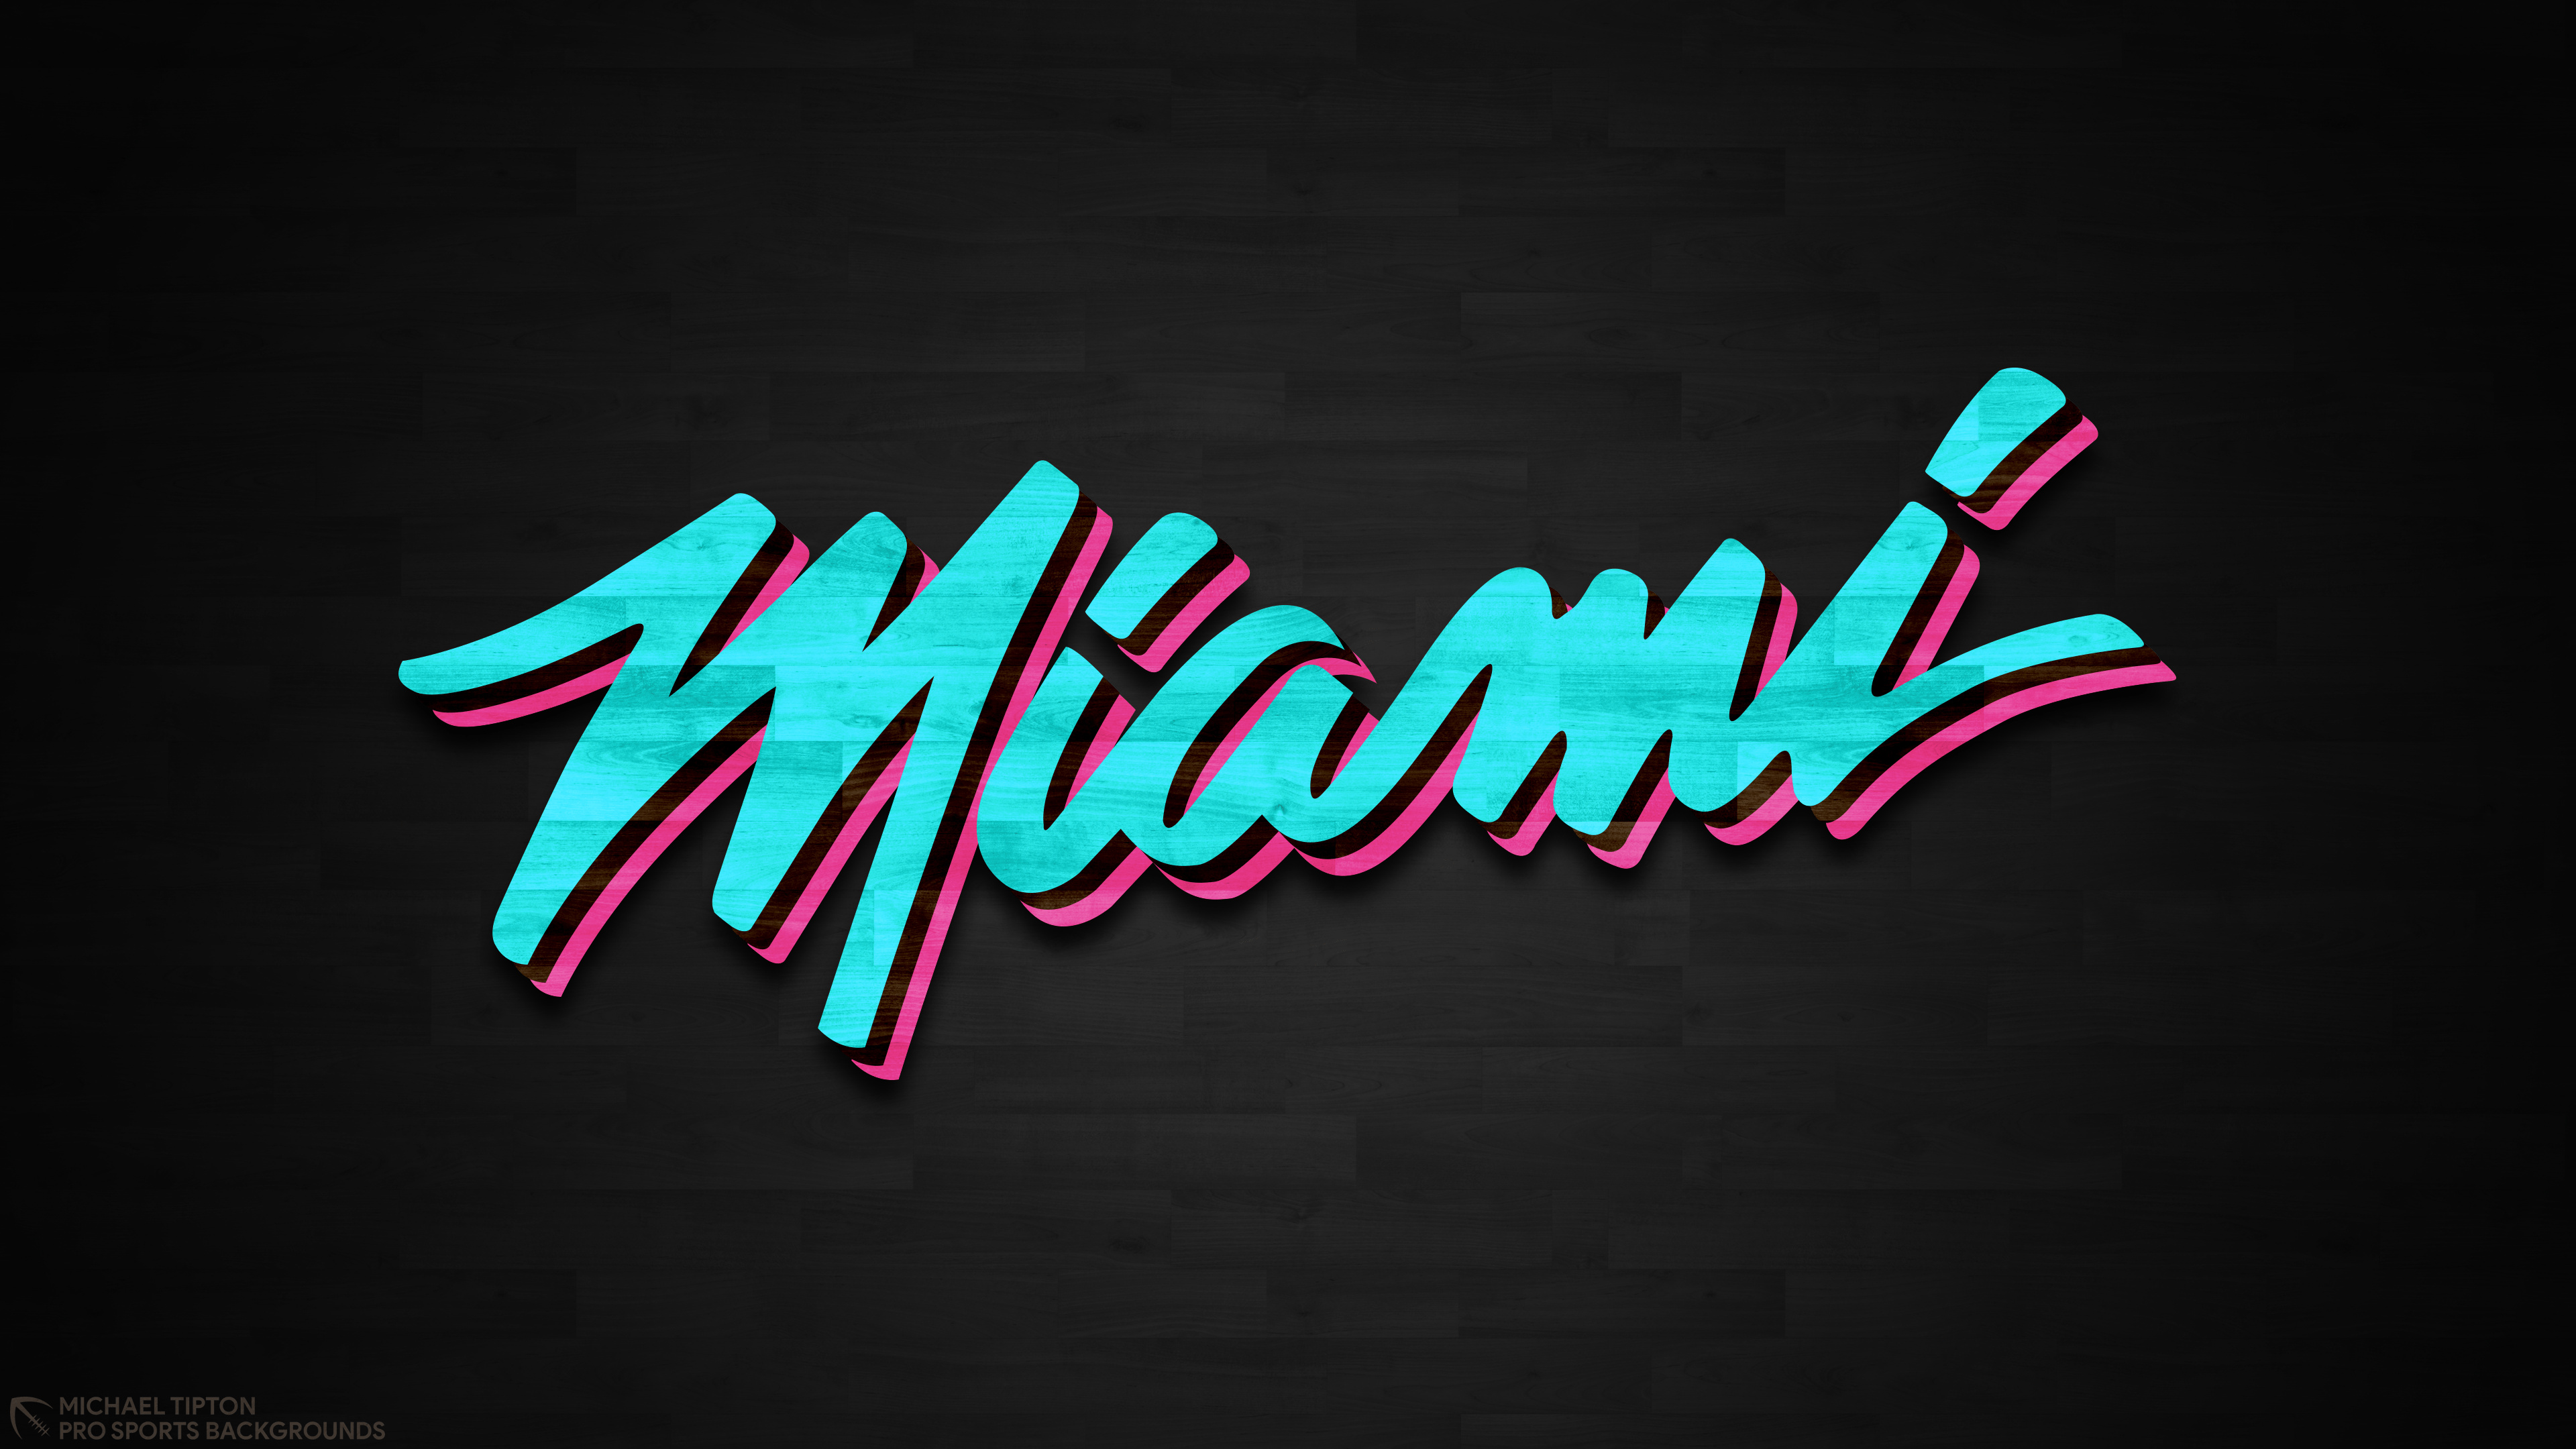 4K Miami Heat Wallpaper and Background Image